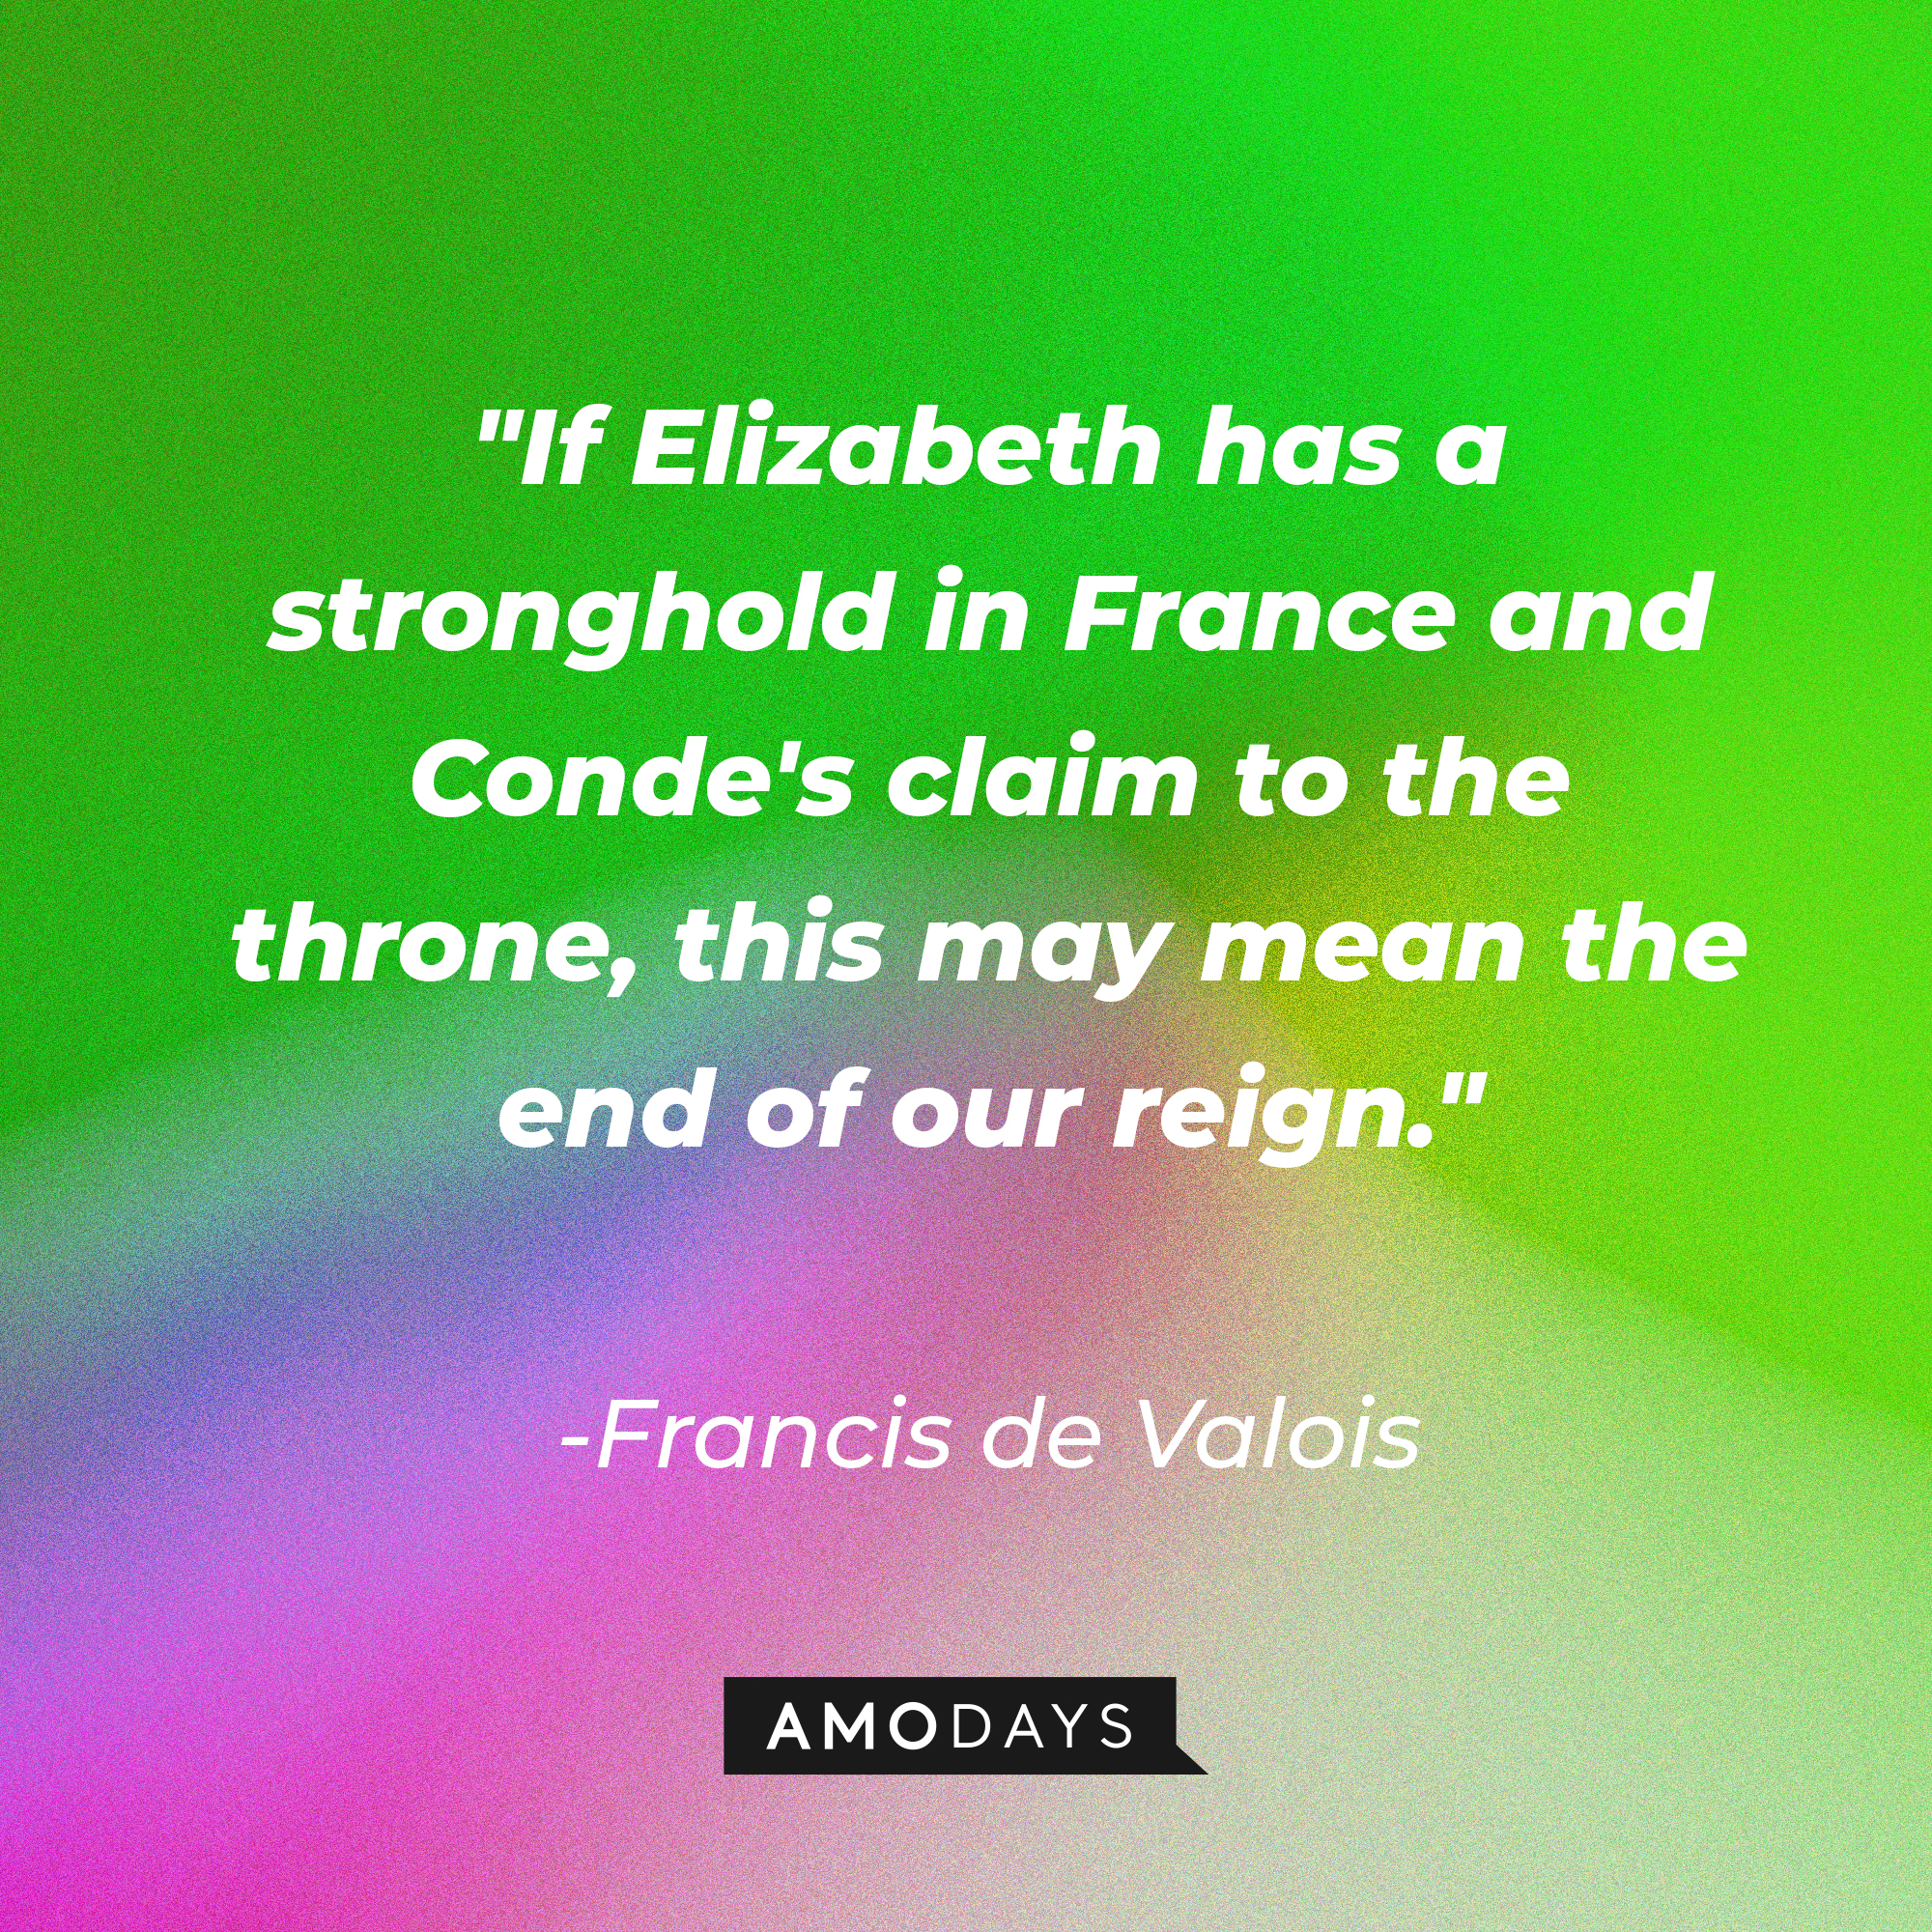 Francis de Valois' quote in "Reign:" "If Elizabeth has a stronghold in France and Conde's claim to the throne this may mean the end of our reign." | Source: Amodays